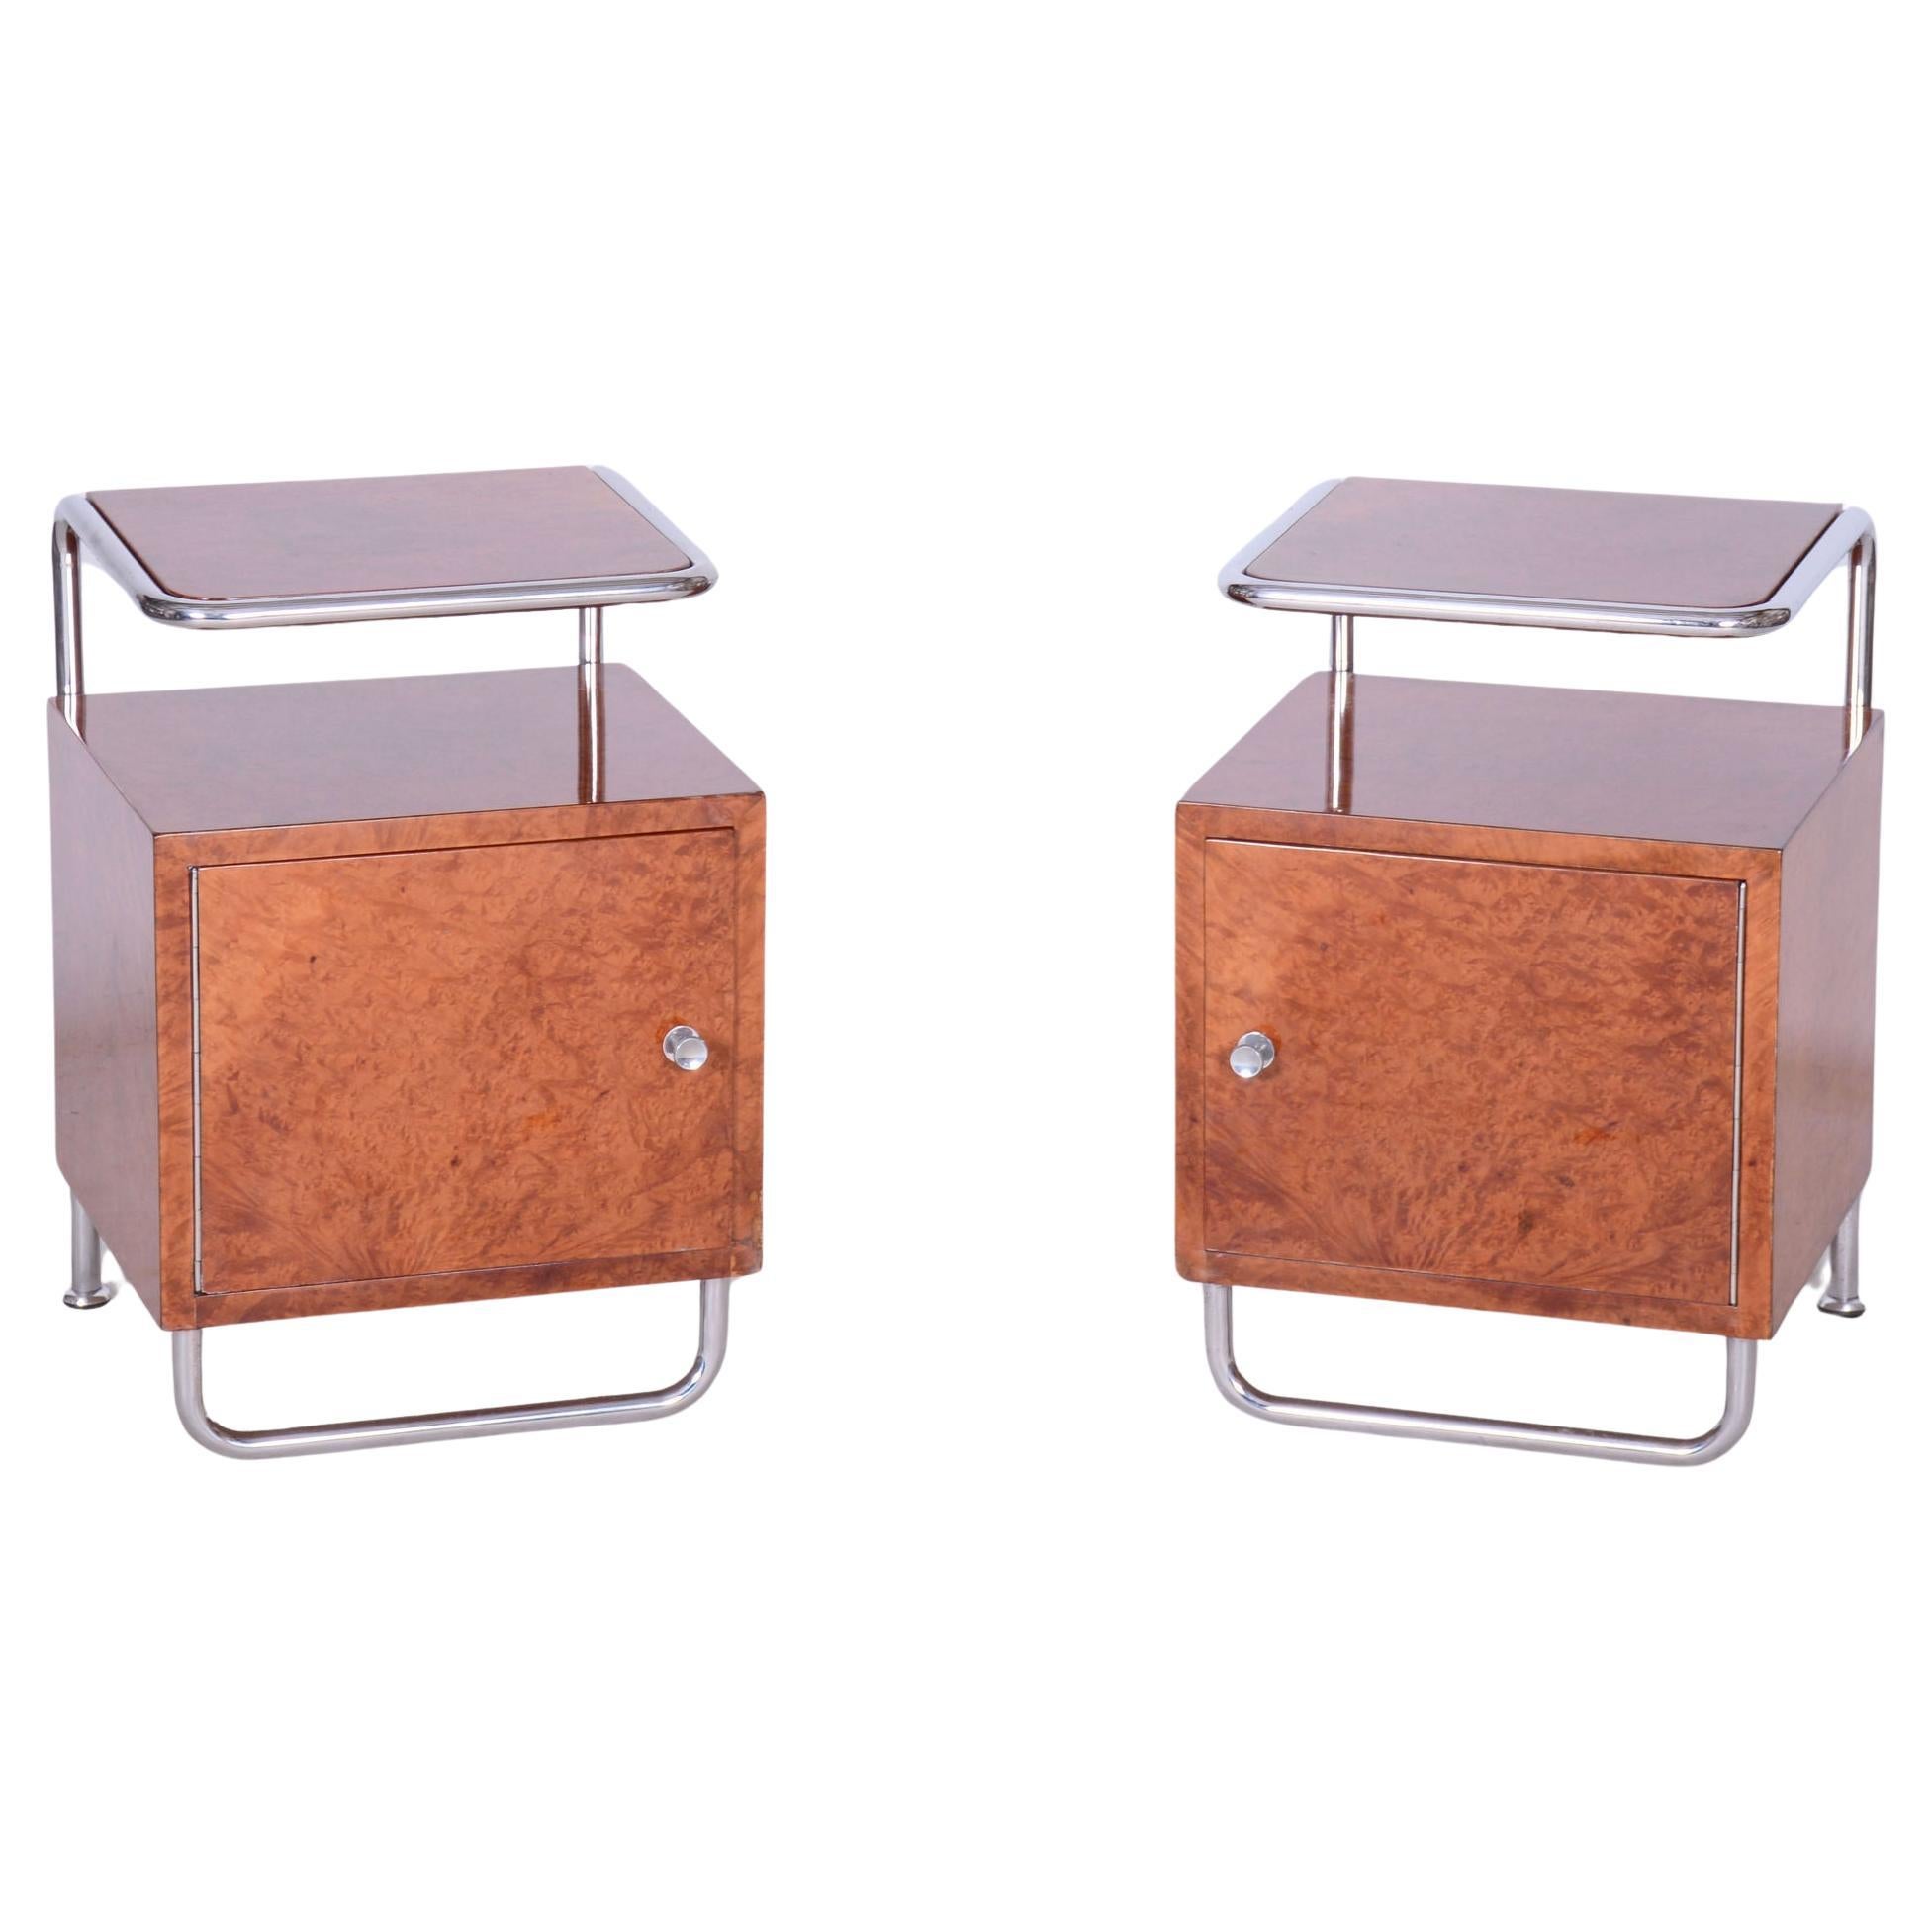 Set of Two Restored Bauhaus Bed-Side Tables, by H. Gottwald, Czech, 1930s For Sale